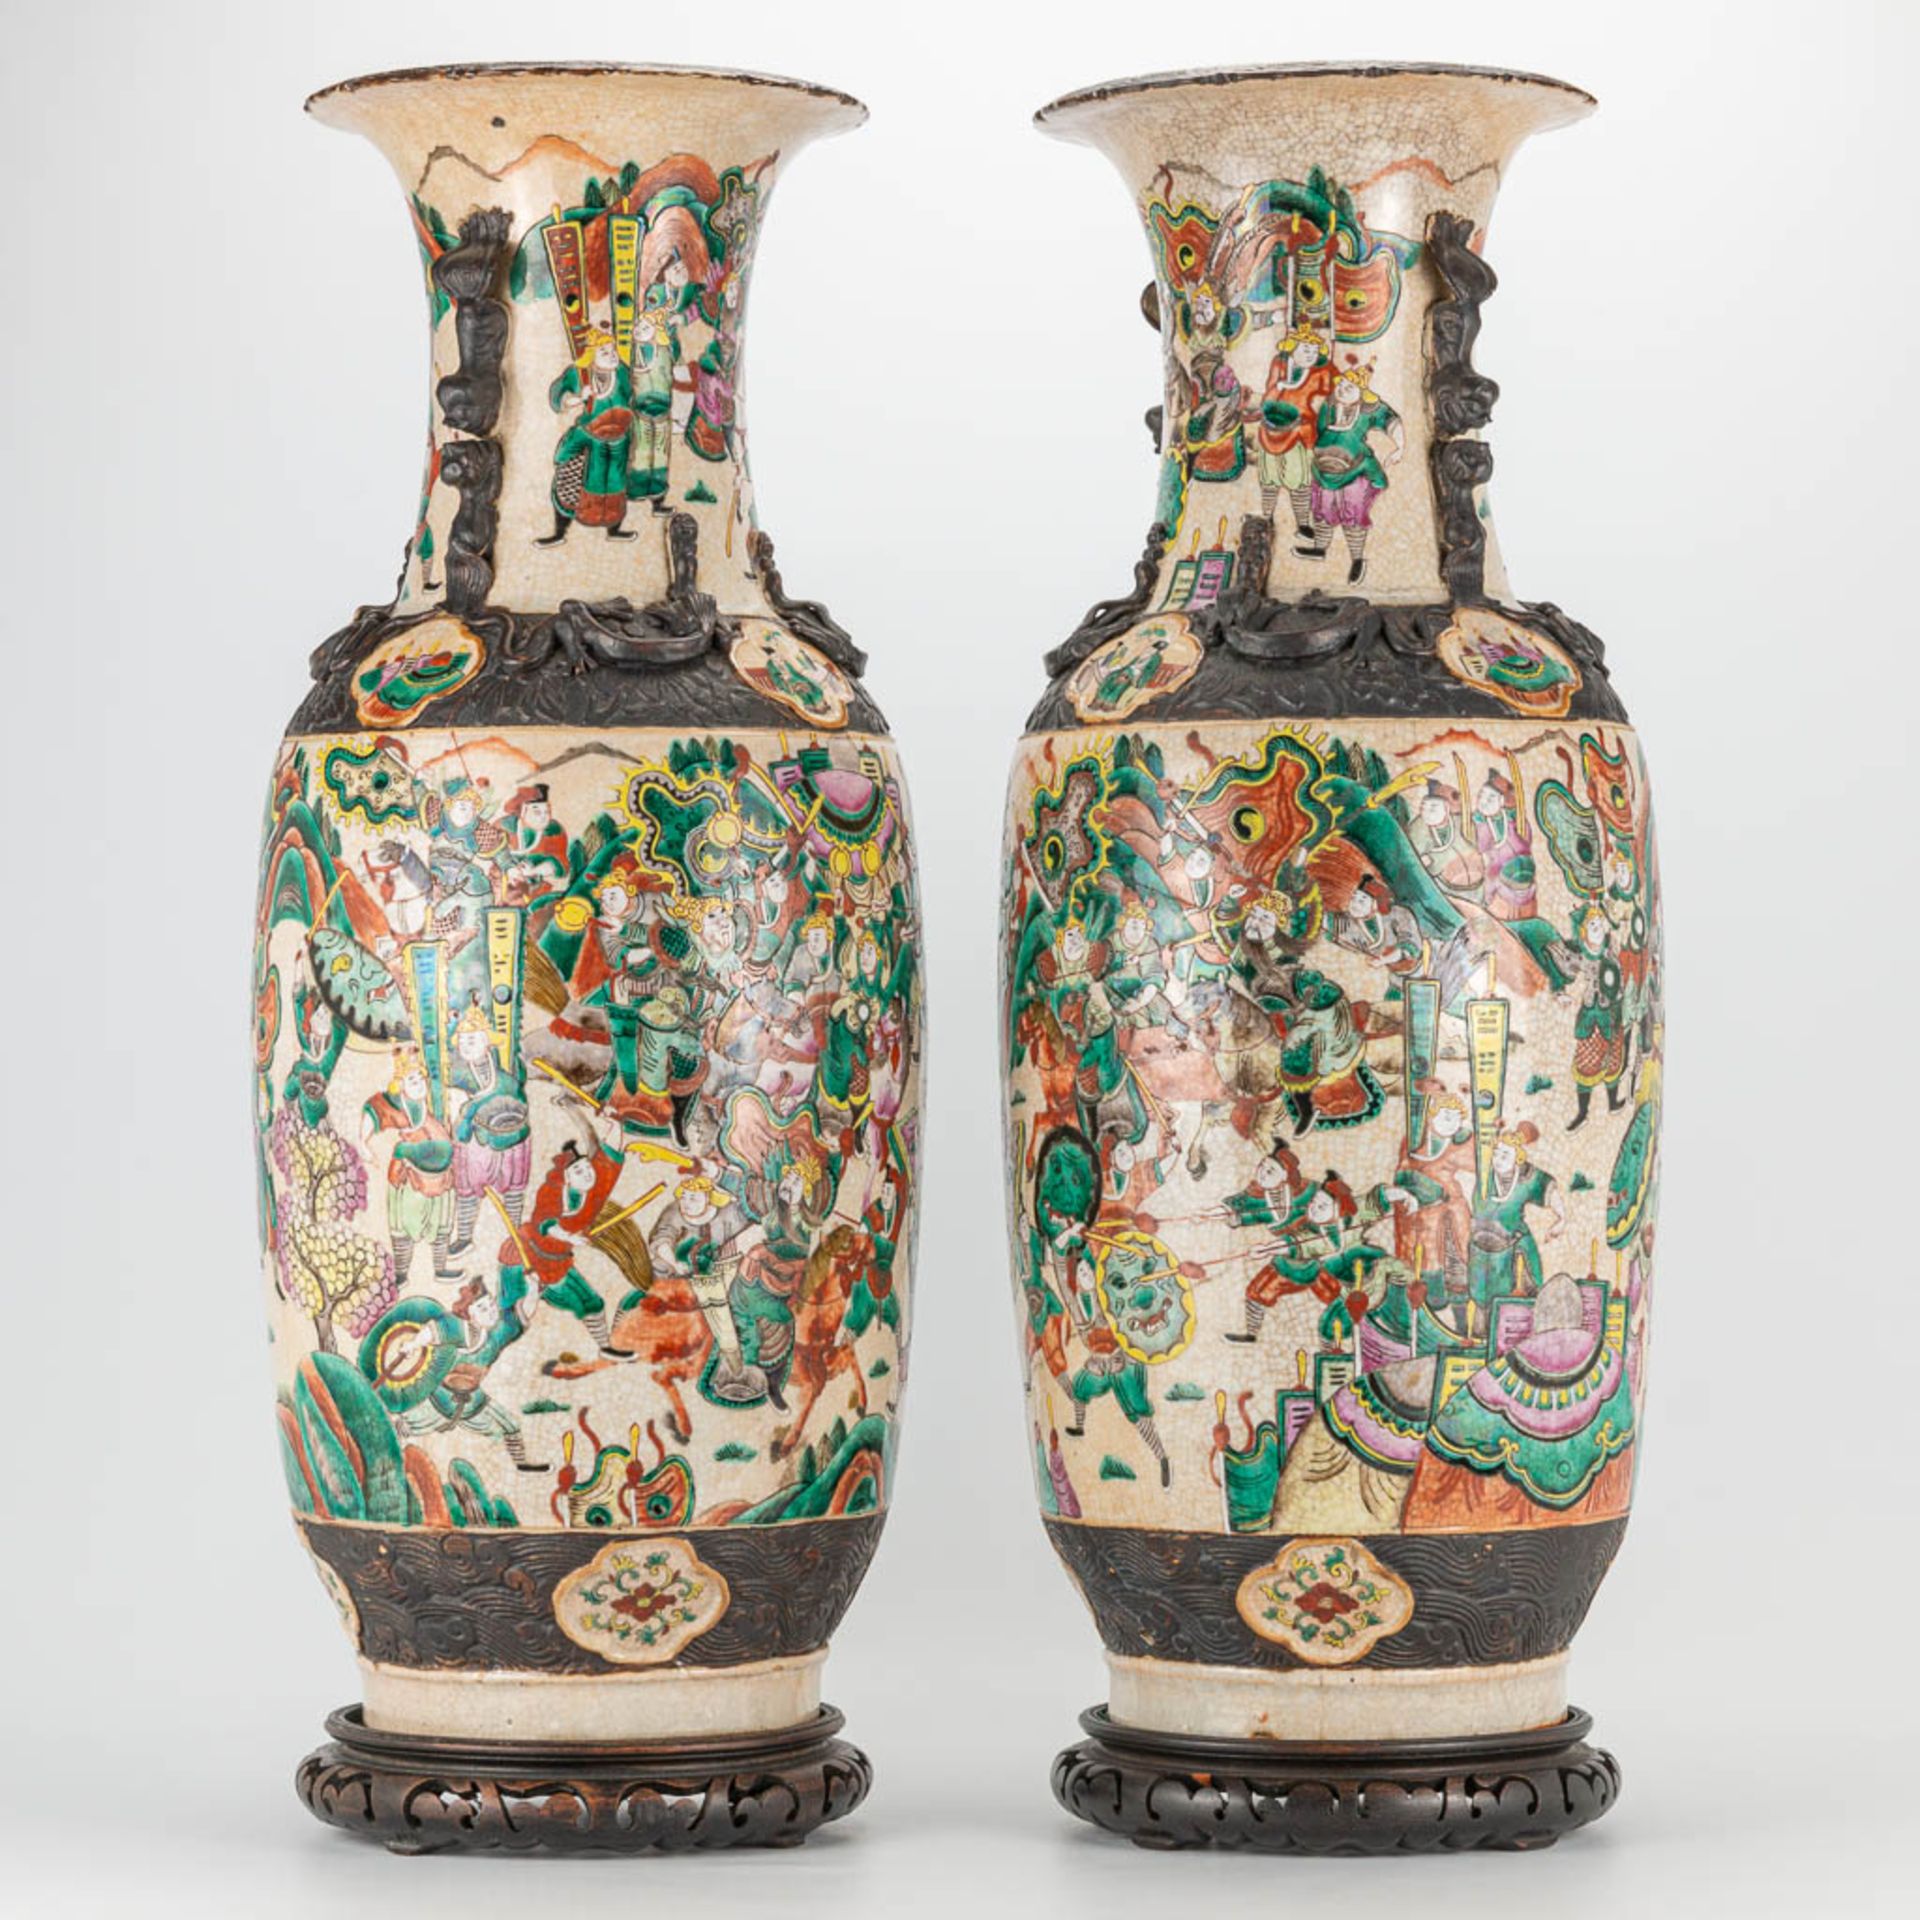 A pair of large Nanking Chinese vases with decor of warriors. 19th/20th century. (62 x 24 cm) - Image 8 of 29